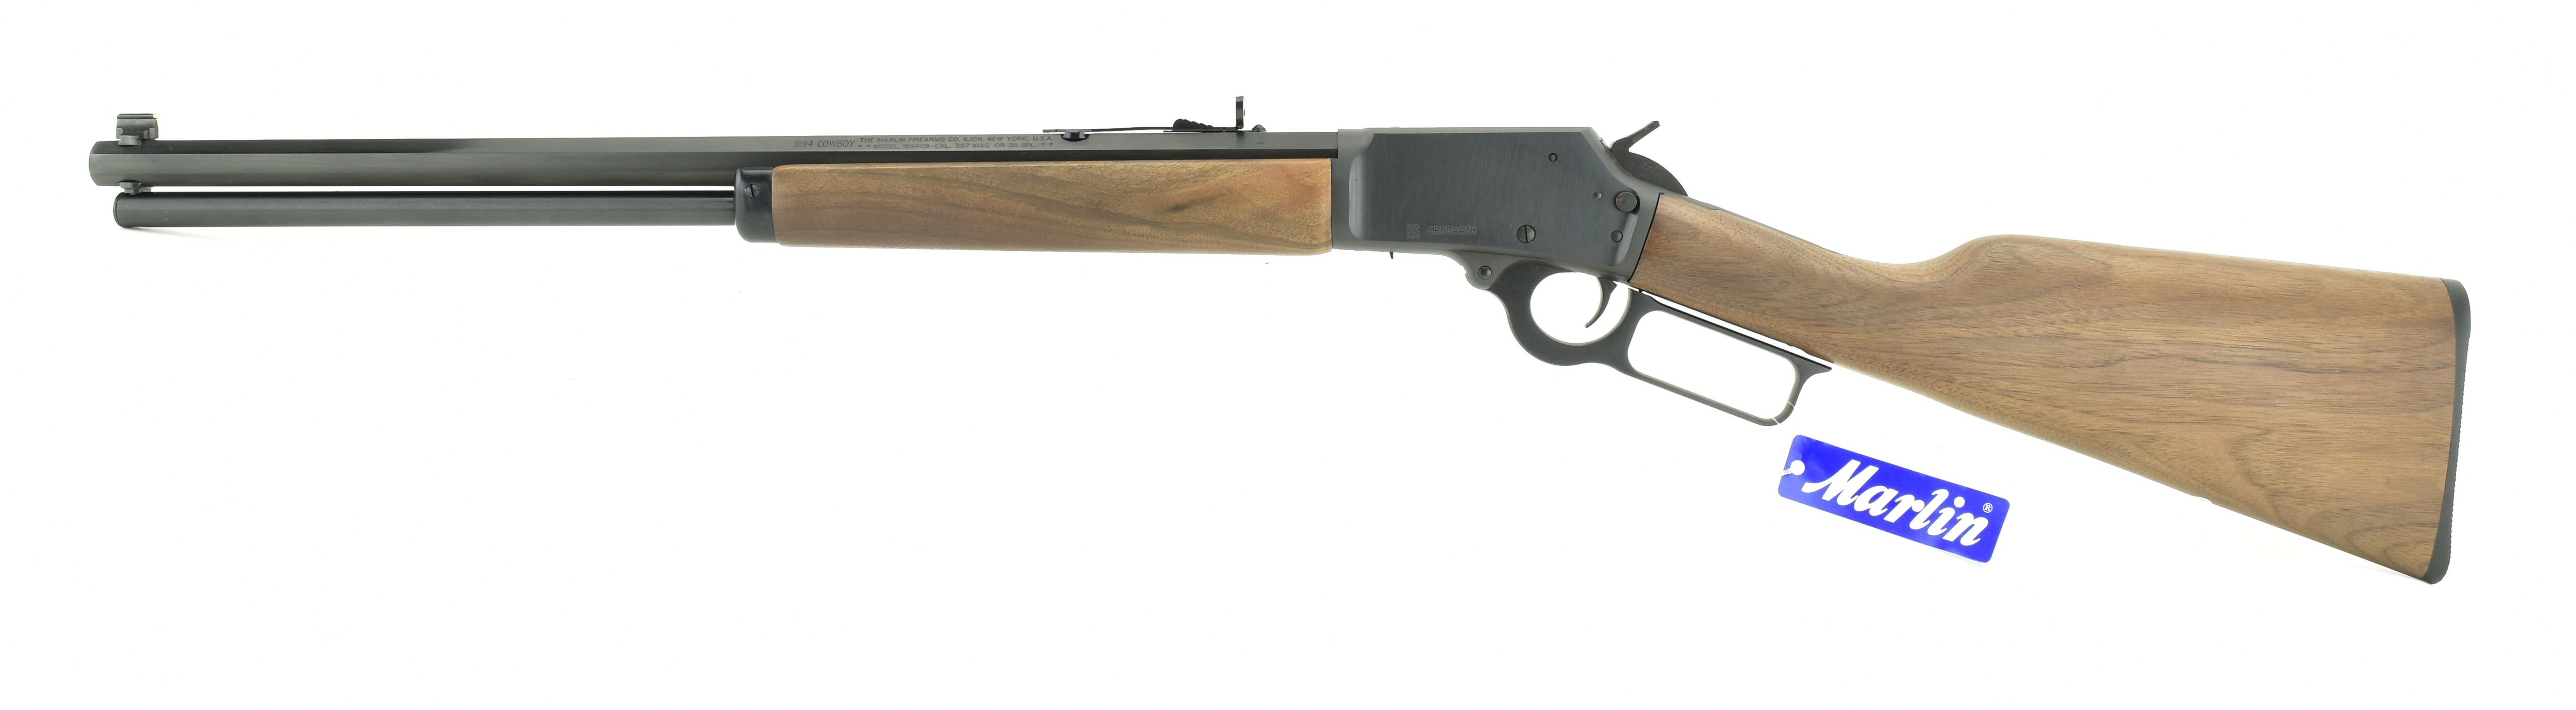 Marlin 1894C Lever Action Centerfire Rifle 38 Special/357, 51% OFF